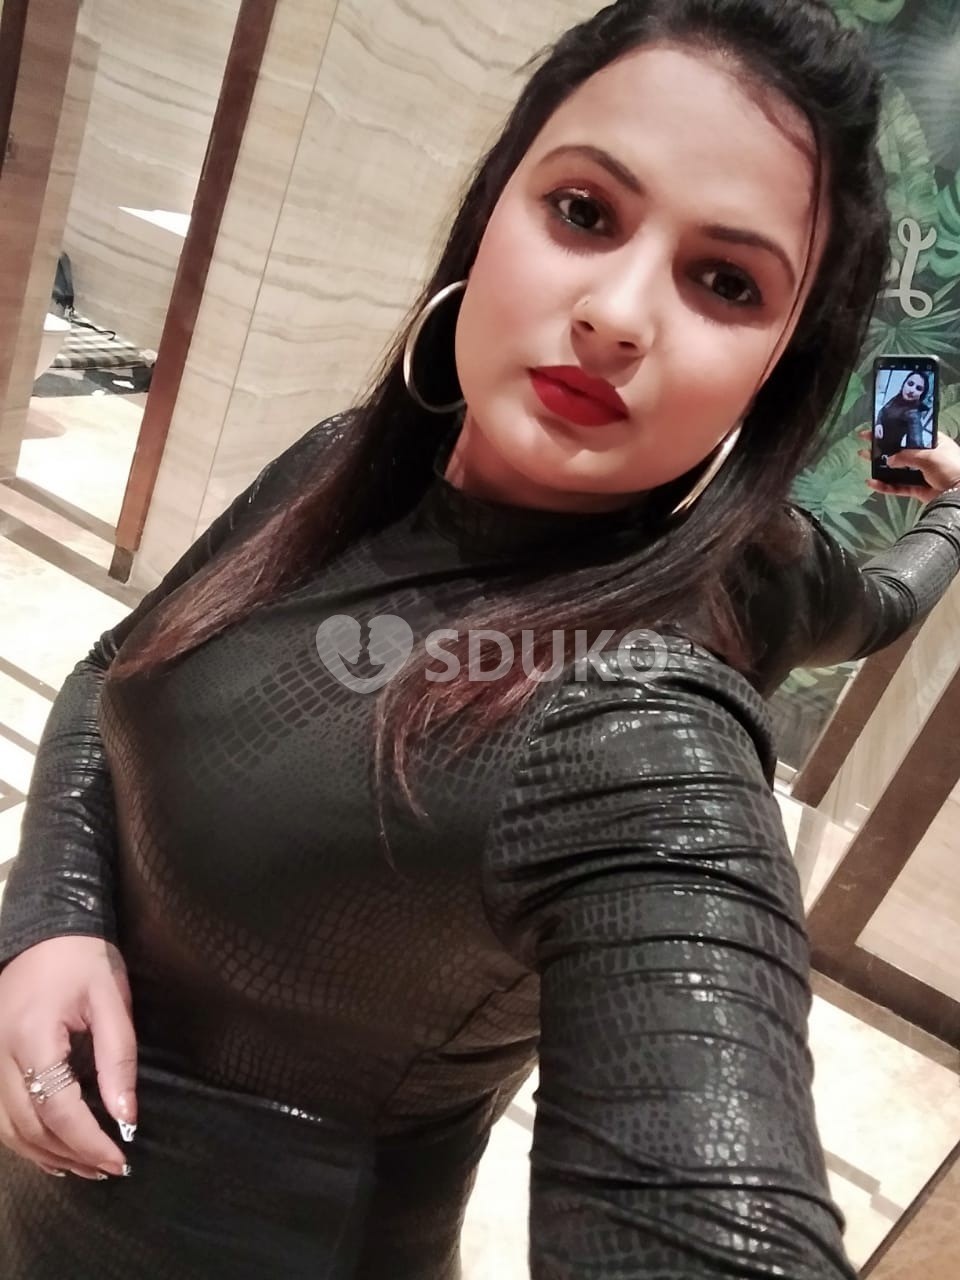 Gopalpuram,❣️🥰✅. 100% SAFE AND SECURE TODAY LOW PRICE UNLIMITED ENJOY HOT COLLEGE GIRL HOUSEWIFE AUNTIES AVAILA